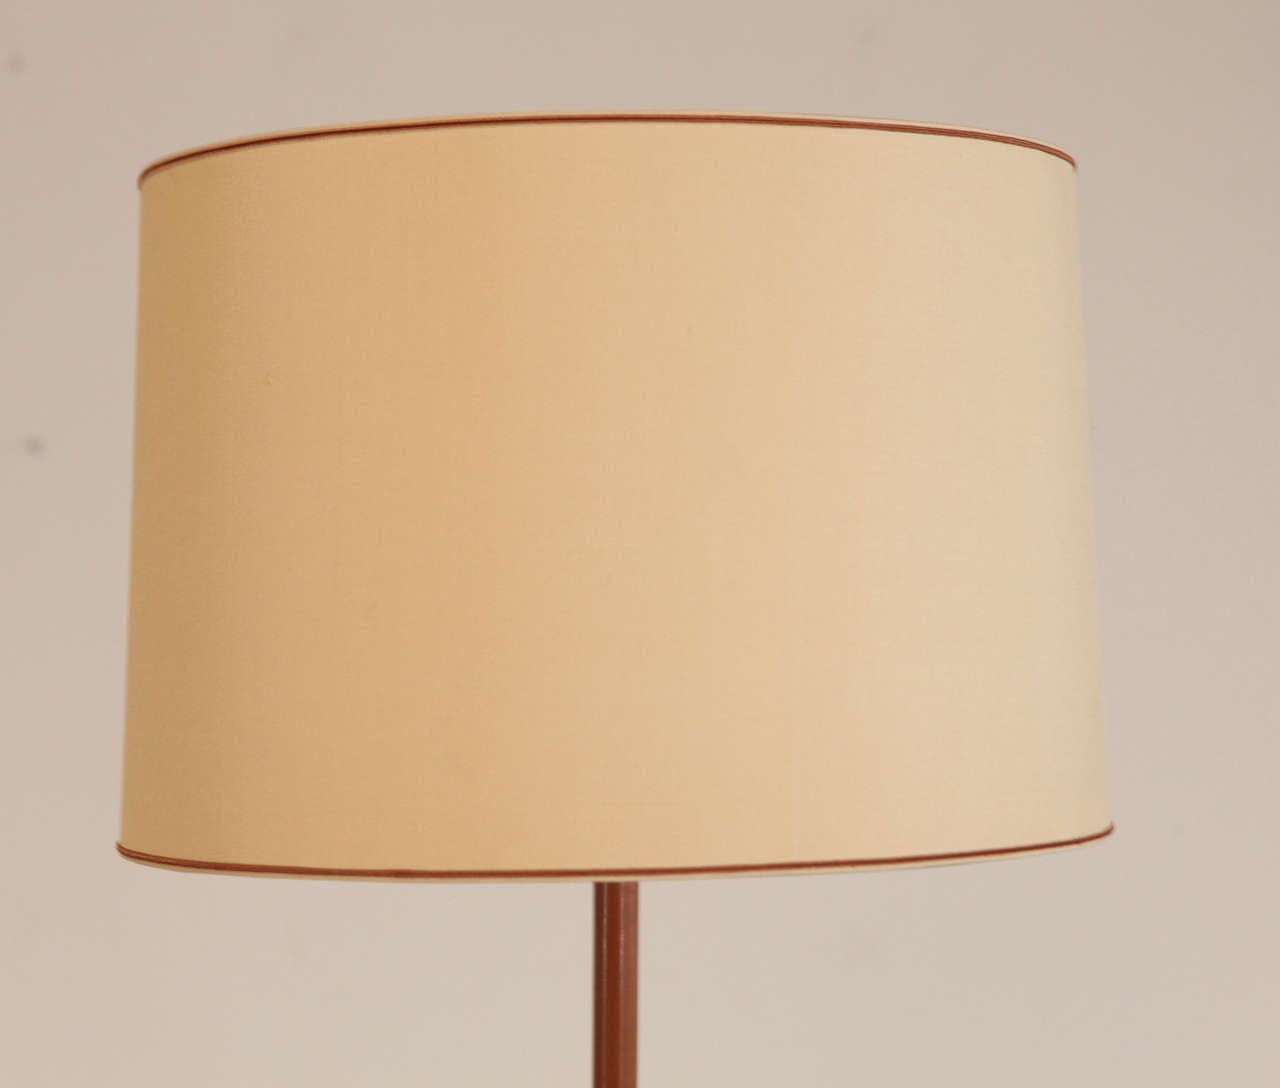 French Jacques Adnet Leather Bound Floor Lamp For Sale